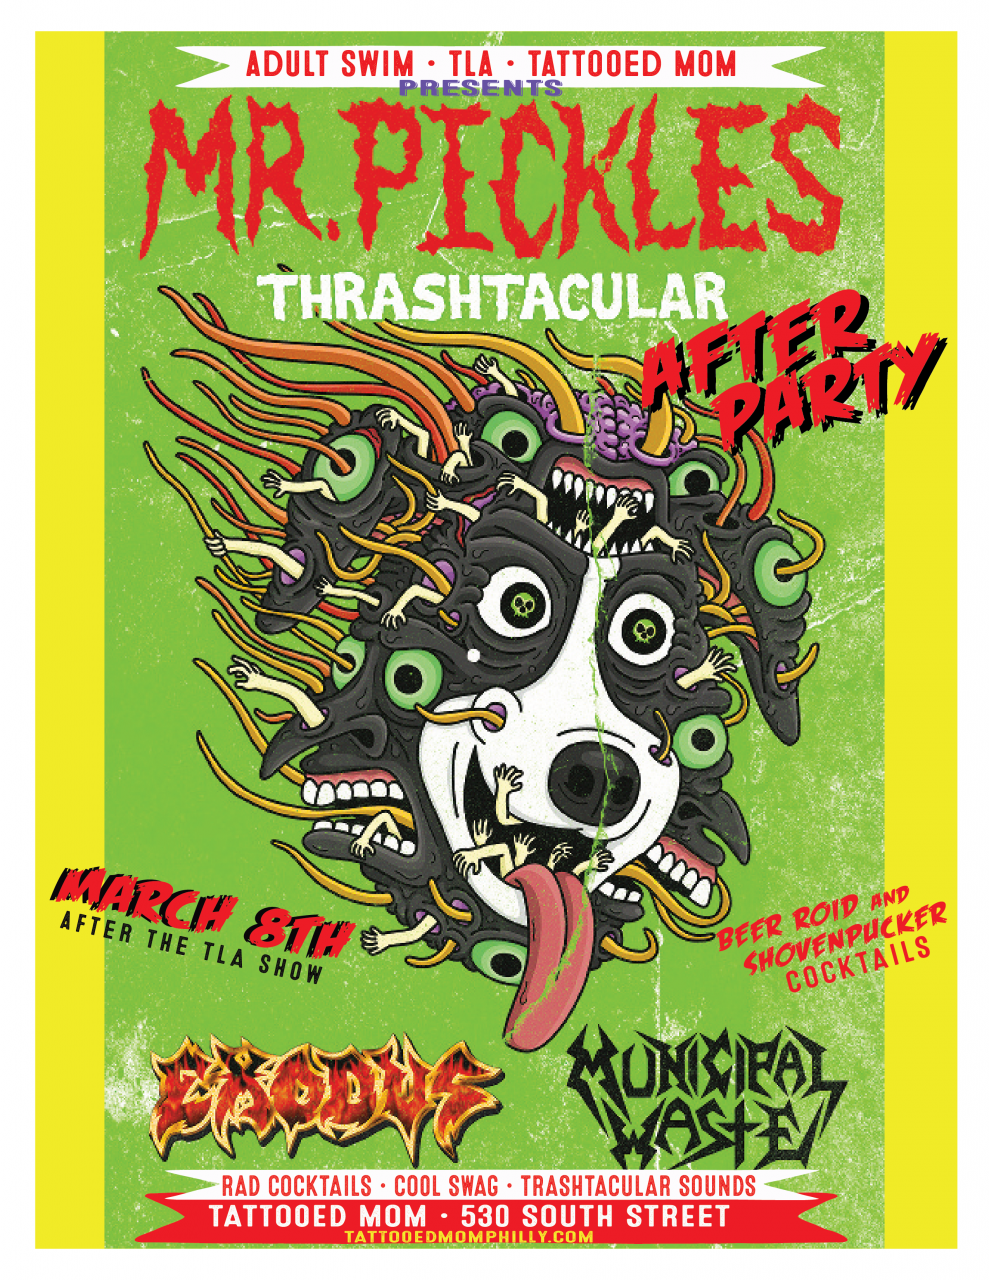 Mr. Pickles Thrashtacular: A Discussion with the creators of Adult Swim's Mr.  Pickles.